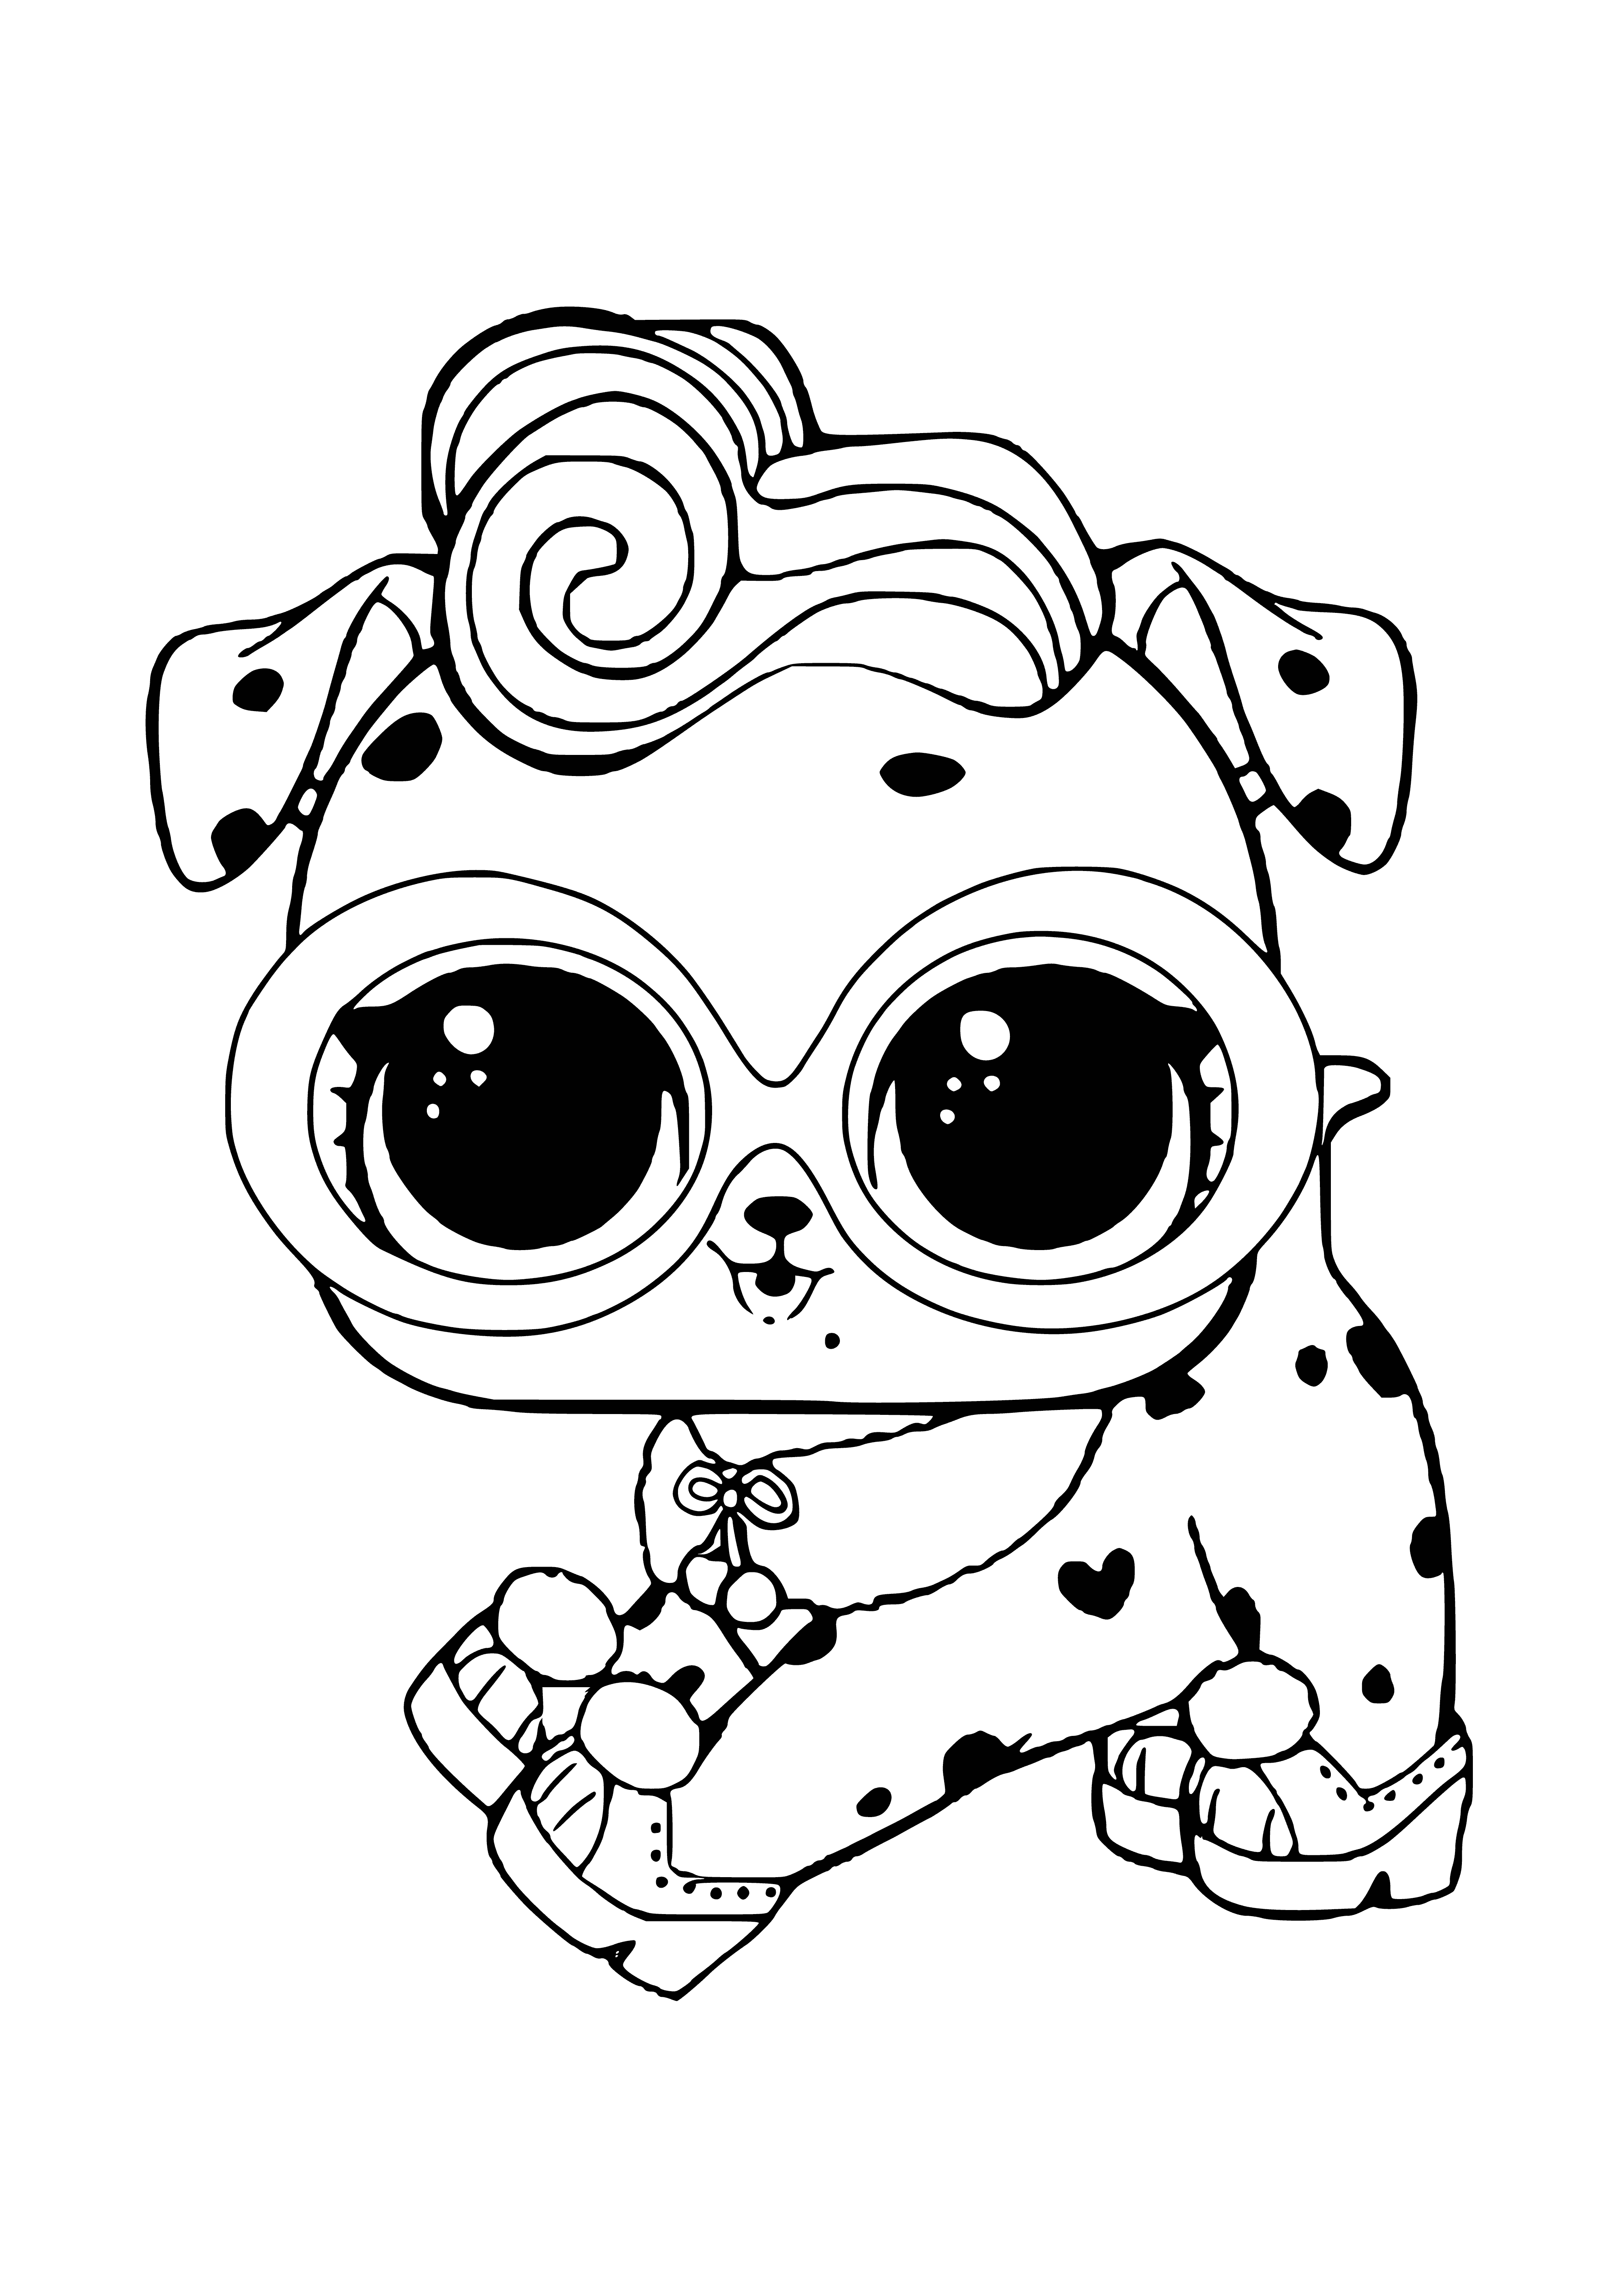 coloring page: Adopt the LOL pet Dalmatian and get its own LOL surprise ball! It has a playful personality and cute black and white spots - sure to bring smiles.